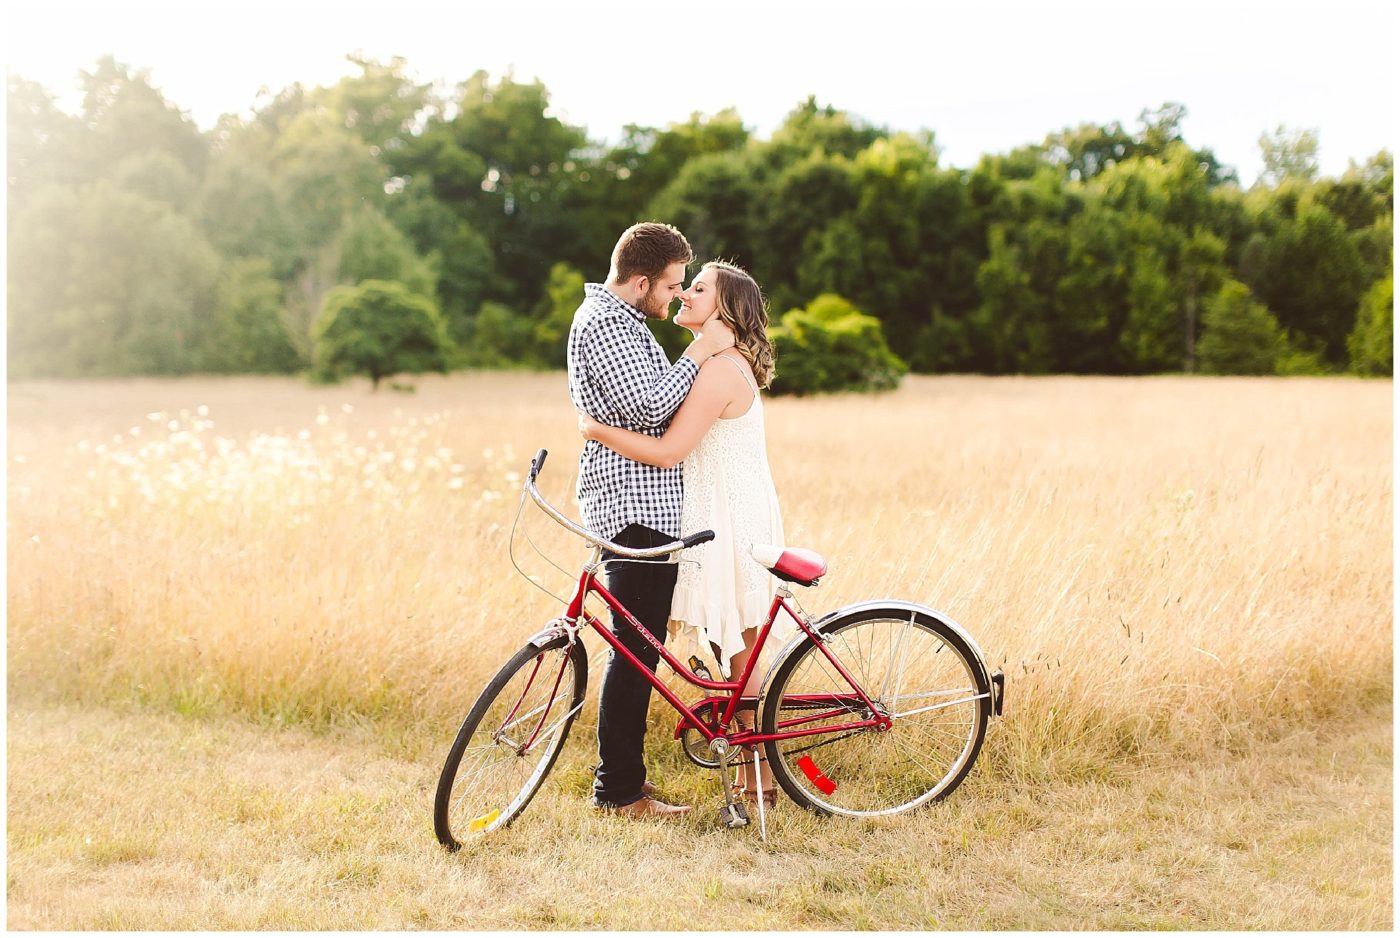 Adorable Bike Engagement Session in the Country, Fort Wayne Wedding Photography_0009